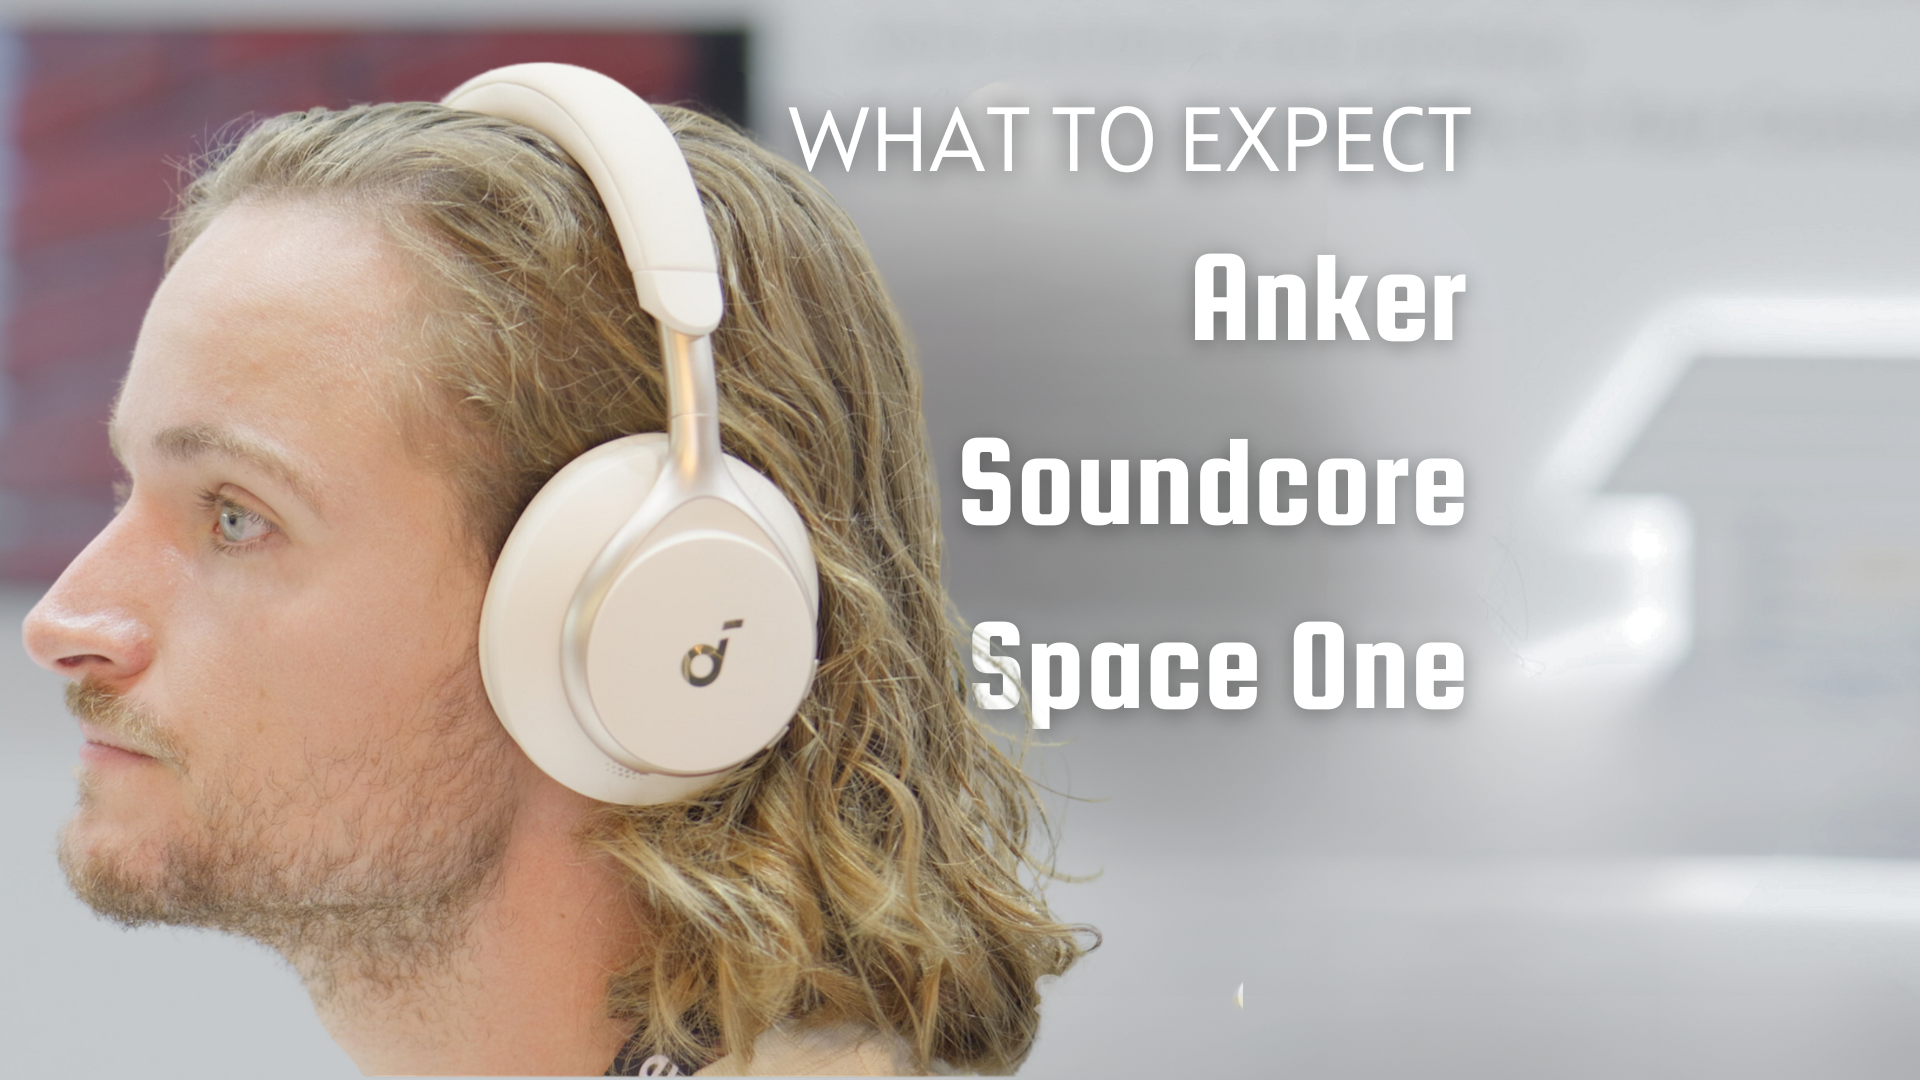 Anker Soundcore Space One launched Keep an eye on these budget cans